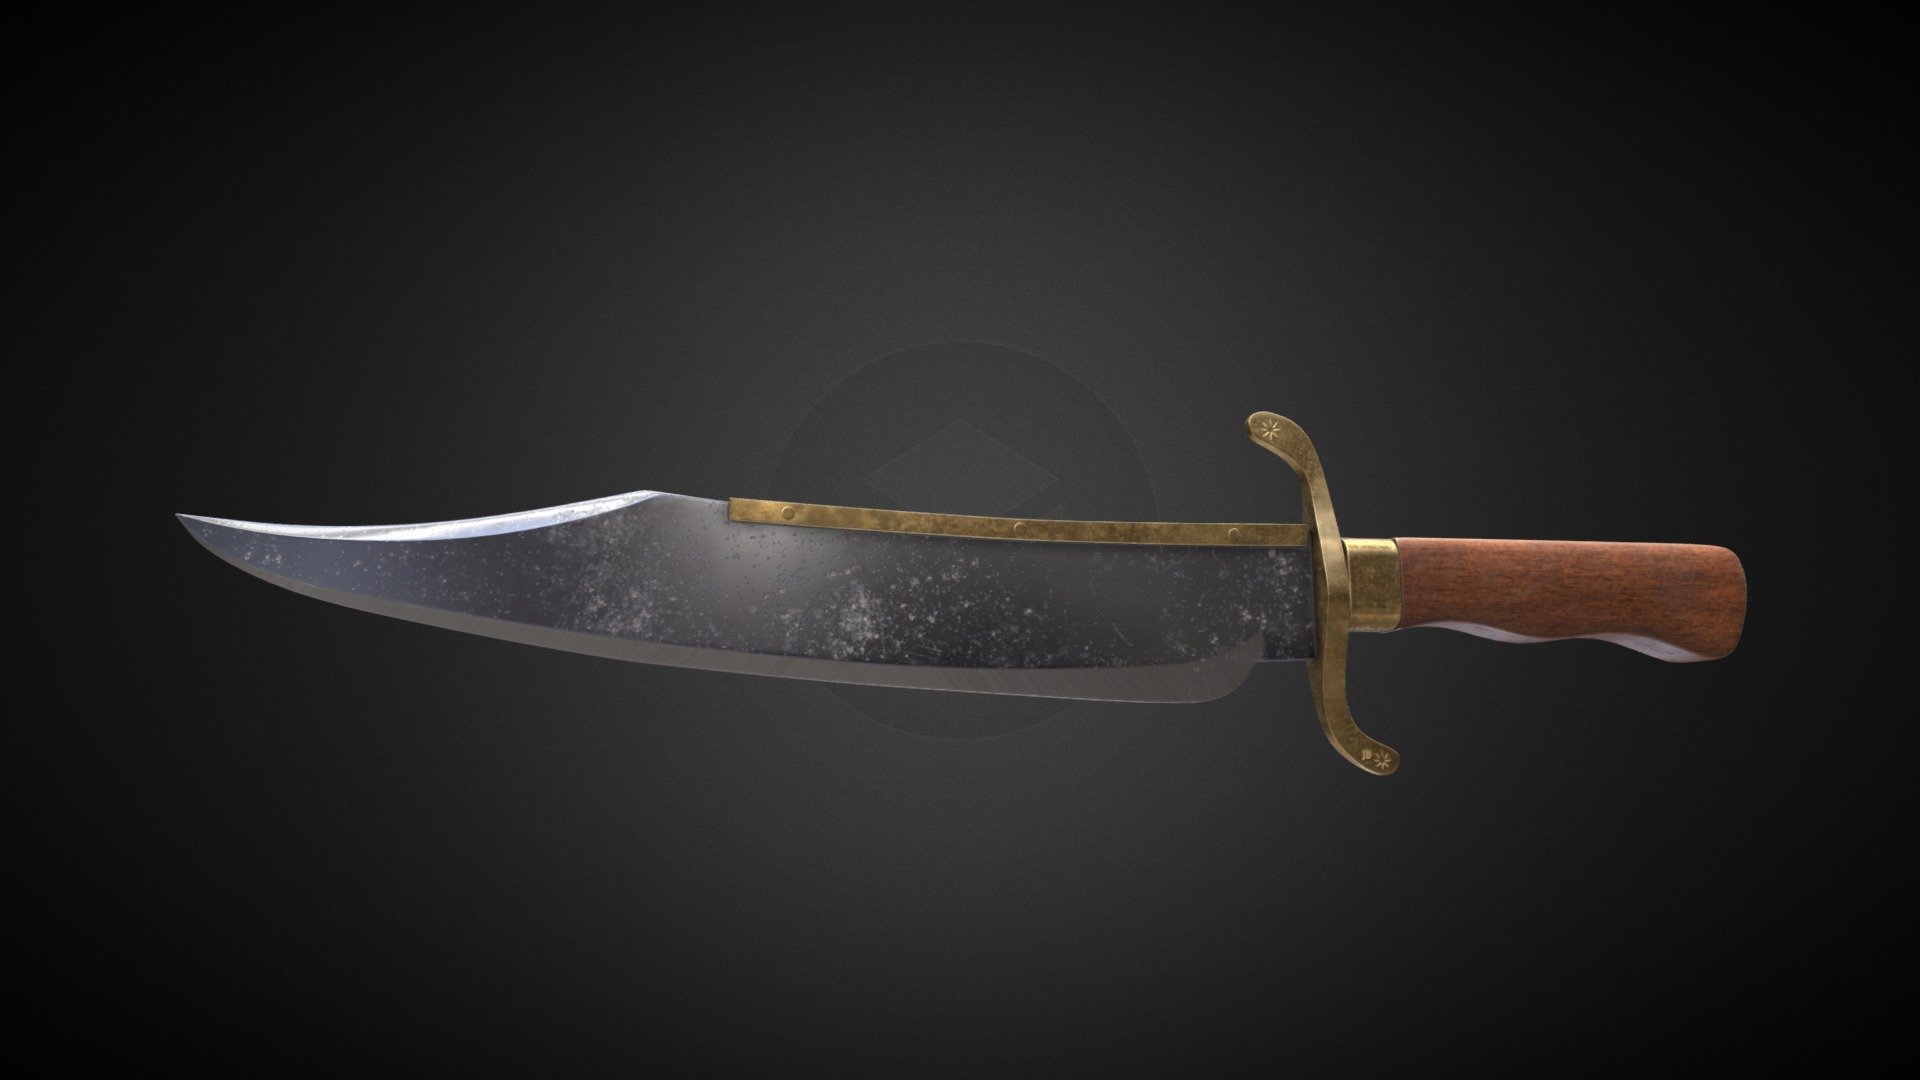 Knife inspired by Musso Bowie knife. Full length is 42.9 cm (16.89 inch).

Modelled in Blender and textured with Substance Painter (4K) 3d model